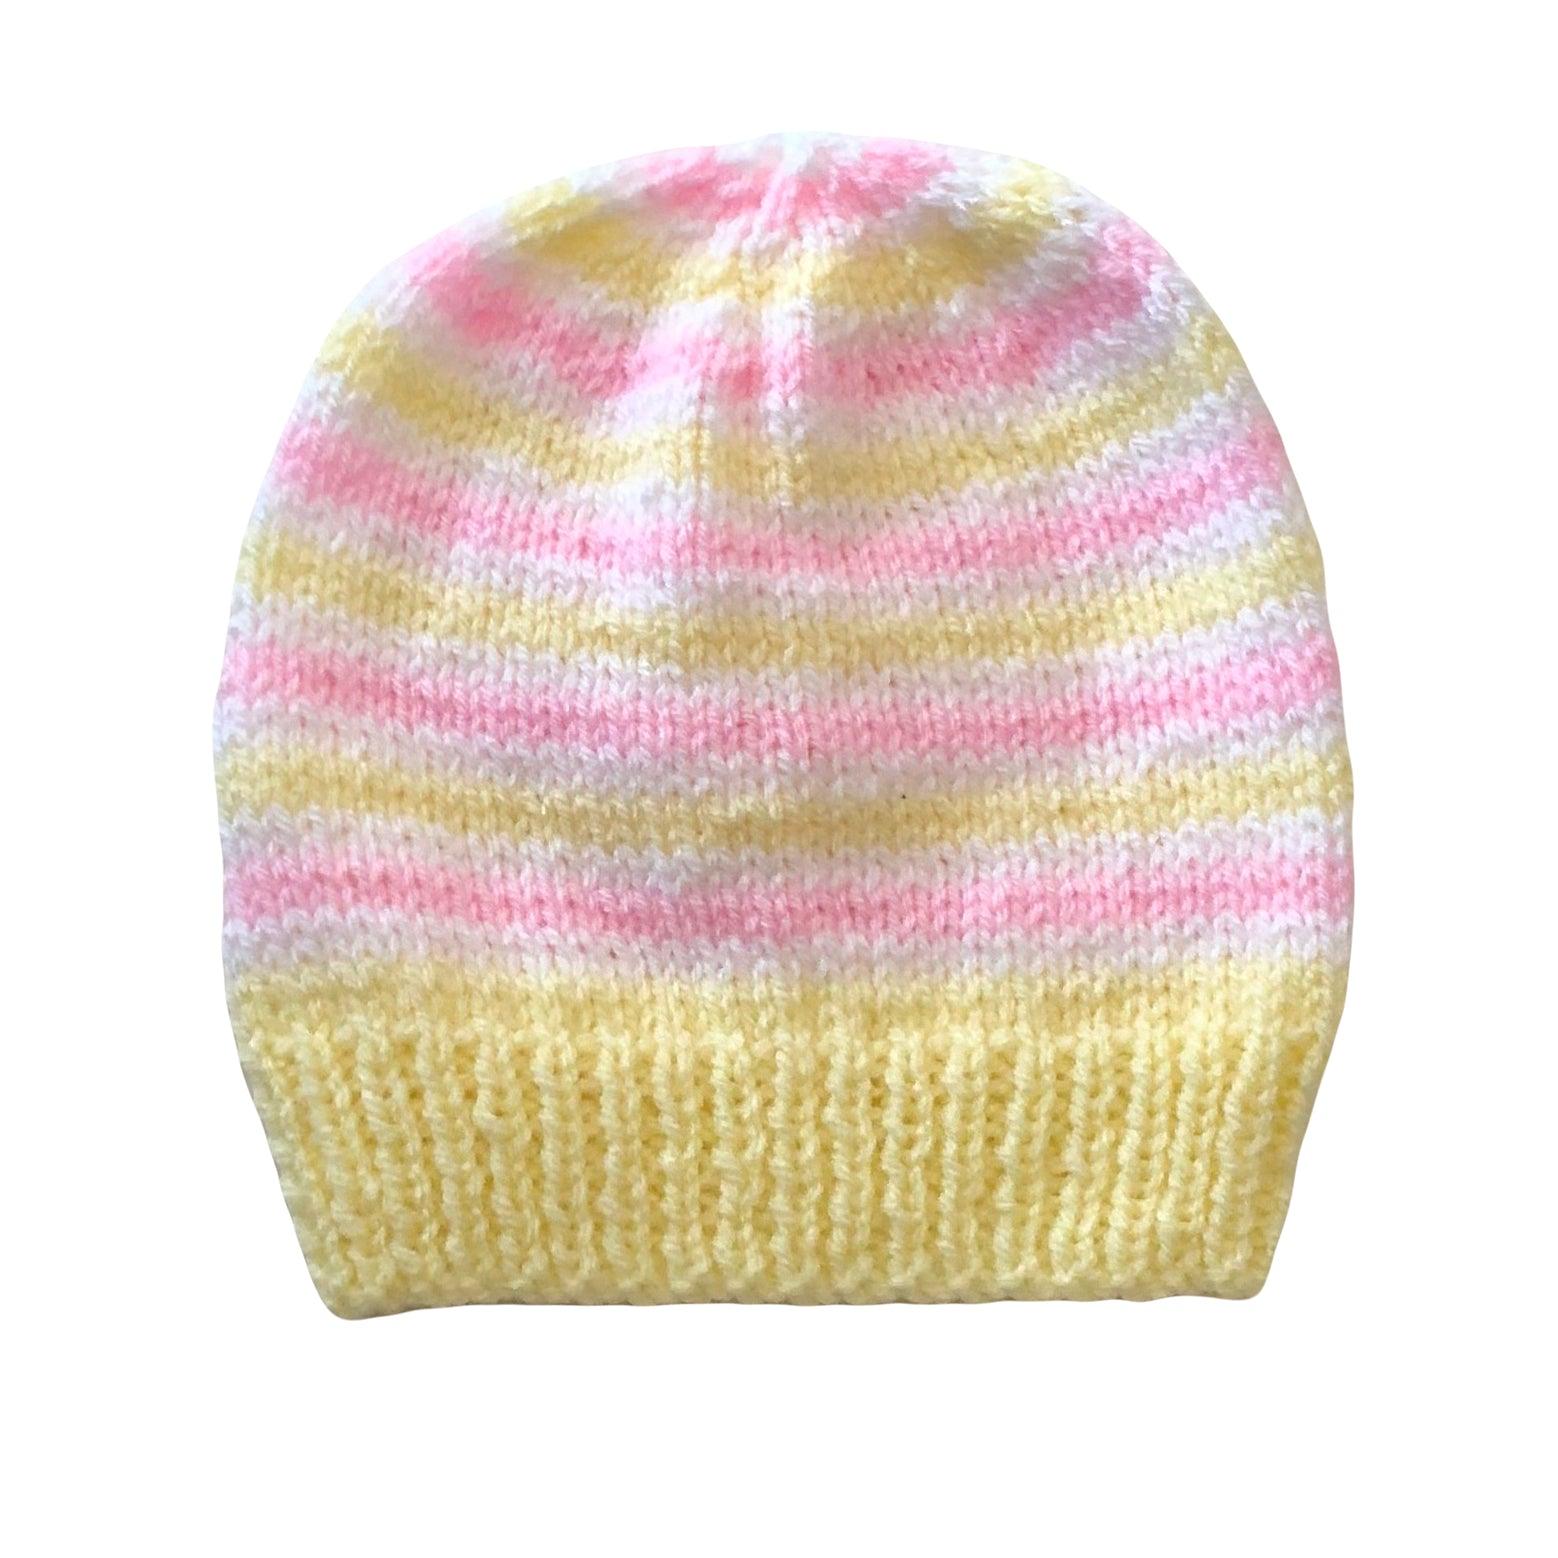 Beautiful Hand Knitted Hat | Oscar & Me | Baby & Children’s Clothing & Accessories